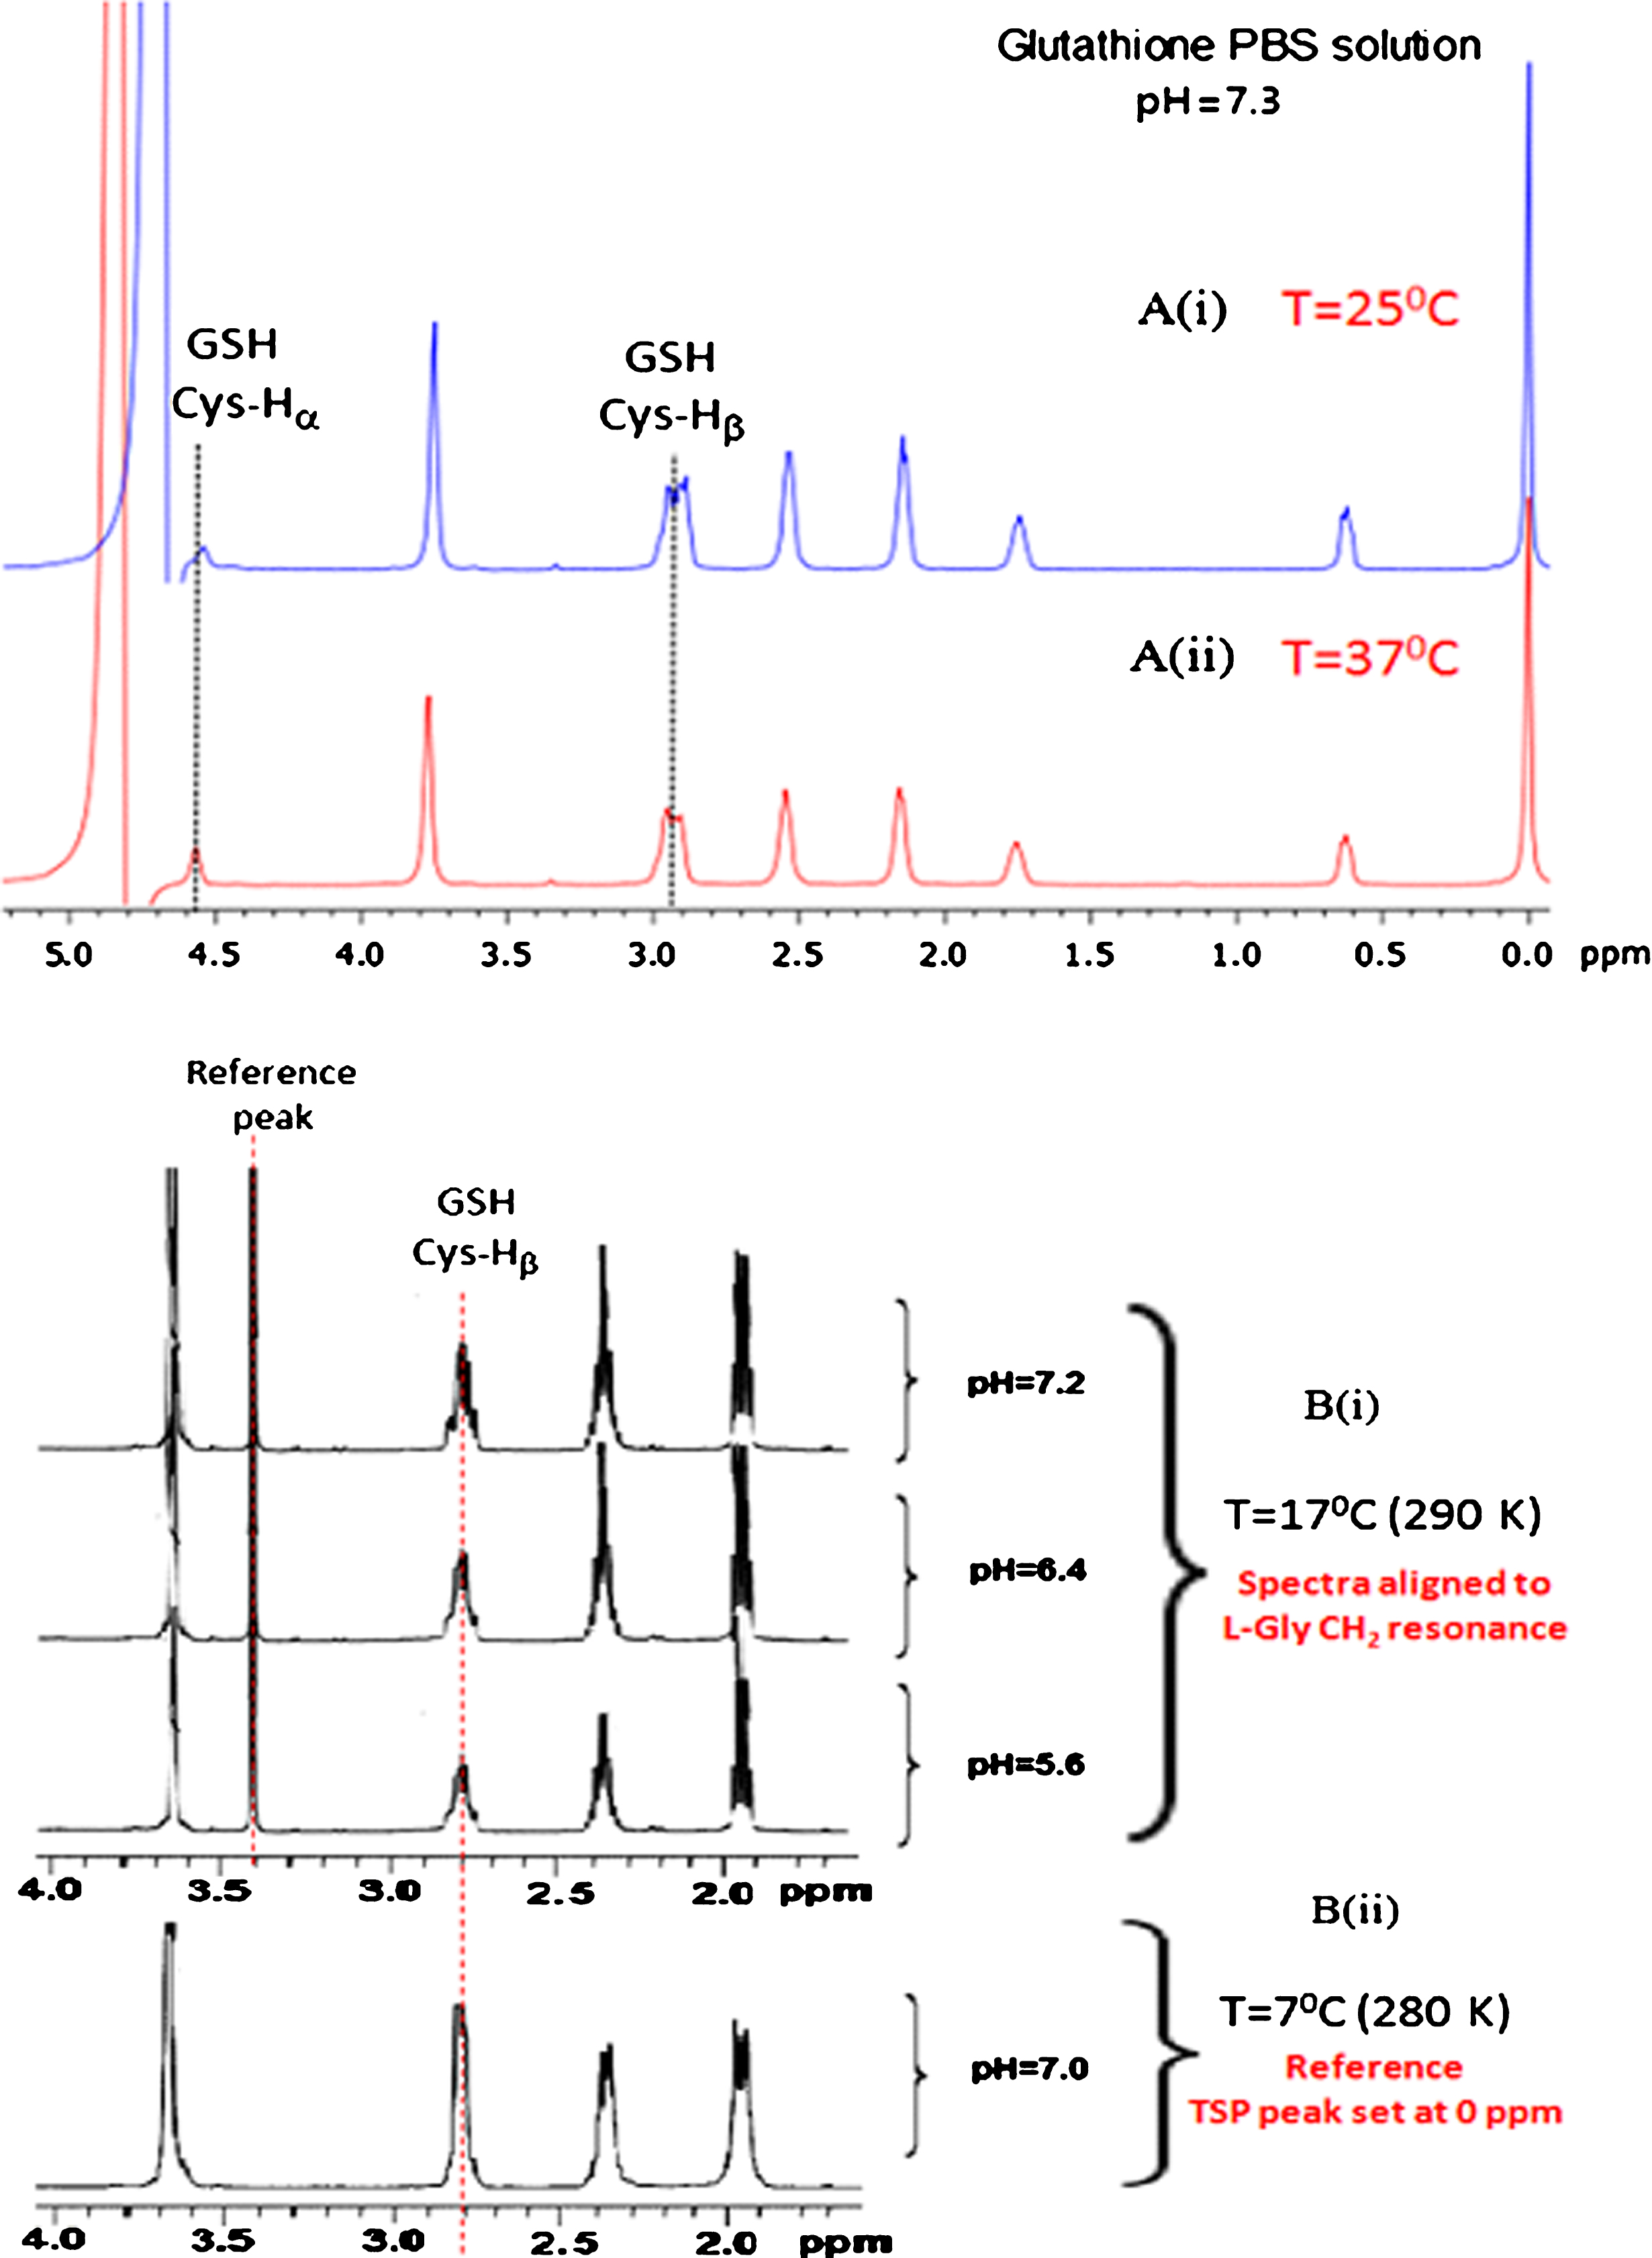 Effect on Cysteine GSH peak positions under varying environmental conditions. (A) 1D NMR spectra of GSH in PBS solution using 500 MHz NMR at different temperatures (i) 25°C, (ii) 37°C, (B) 1D NMR of GSH in nitrogen degassed aqueous solution with different (i) pH 5.6, 6.4, 7.2 at temperature 290 K (17°C), [19] (ii) pH 7.0 at temperature 280 K (7°C). GSH peak positions remain consistent irrespective of pH and/or temperature (copyright permission obtained from the publisher).